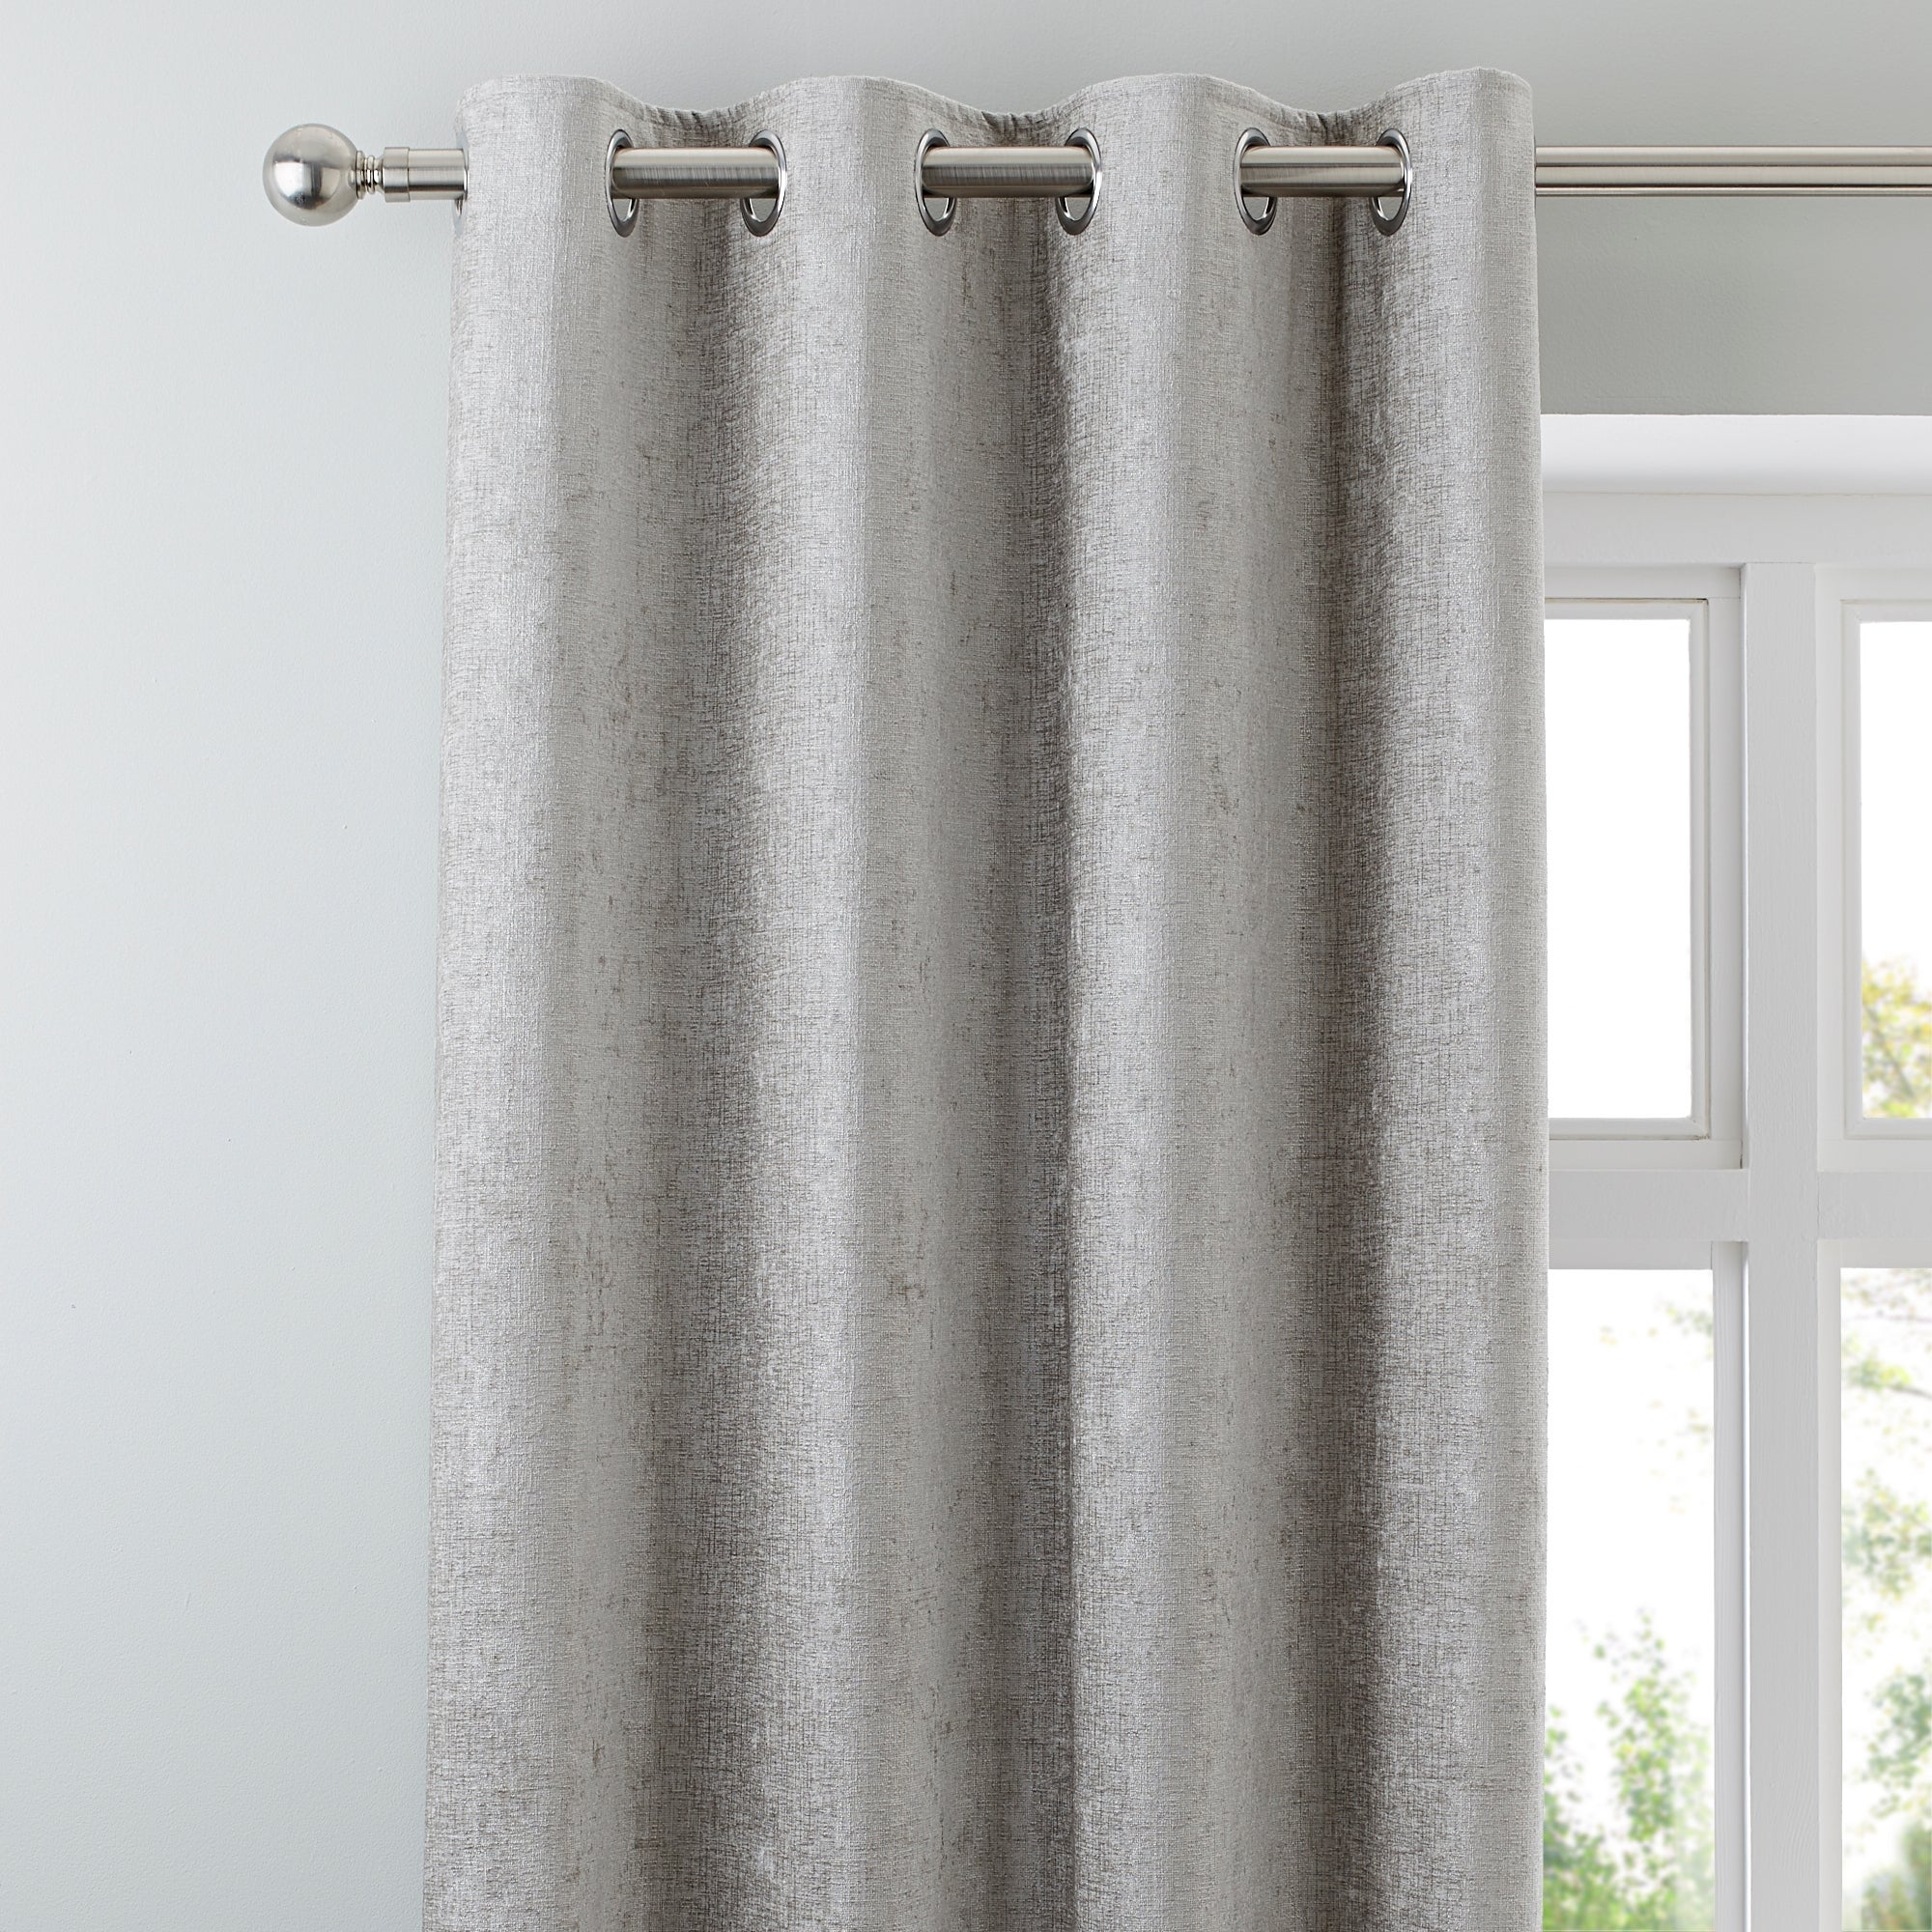 Grey Curtains - From Silver To Charcoal Curtains